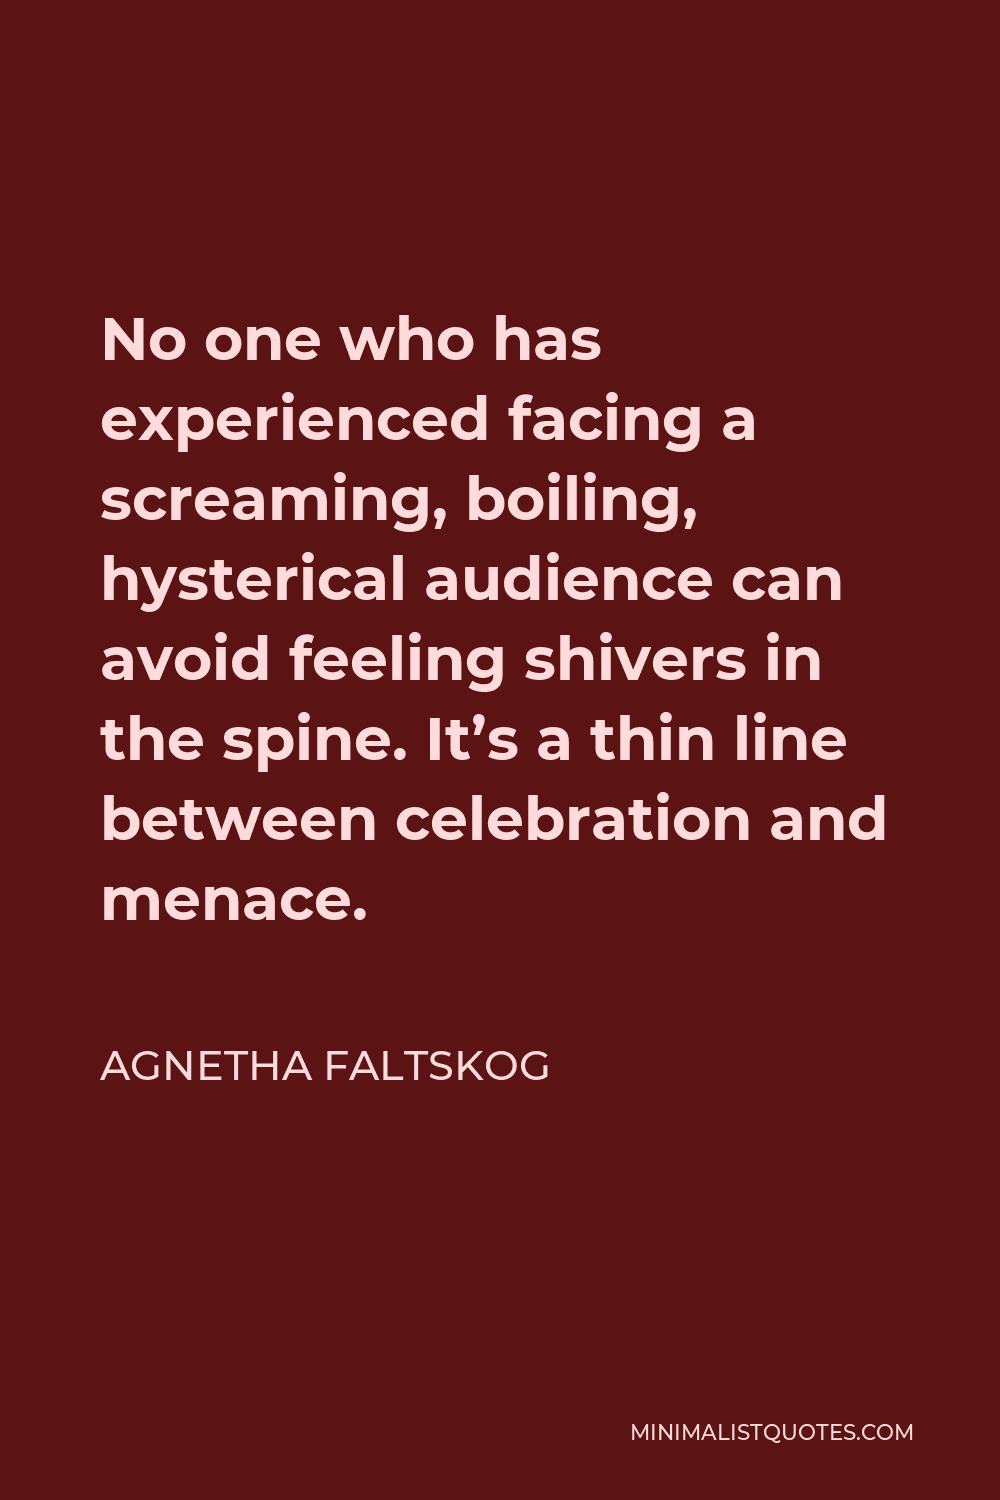 Agnetha Faltskog Quote - No one who has experienced facing a screaming, boiling, hysterical audience can avoid feeling shivers in the spine. It’s a thin line between celebration and menace.